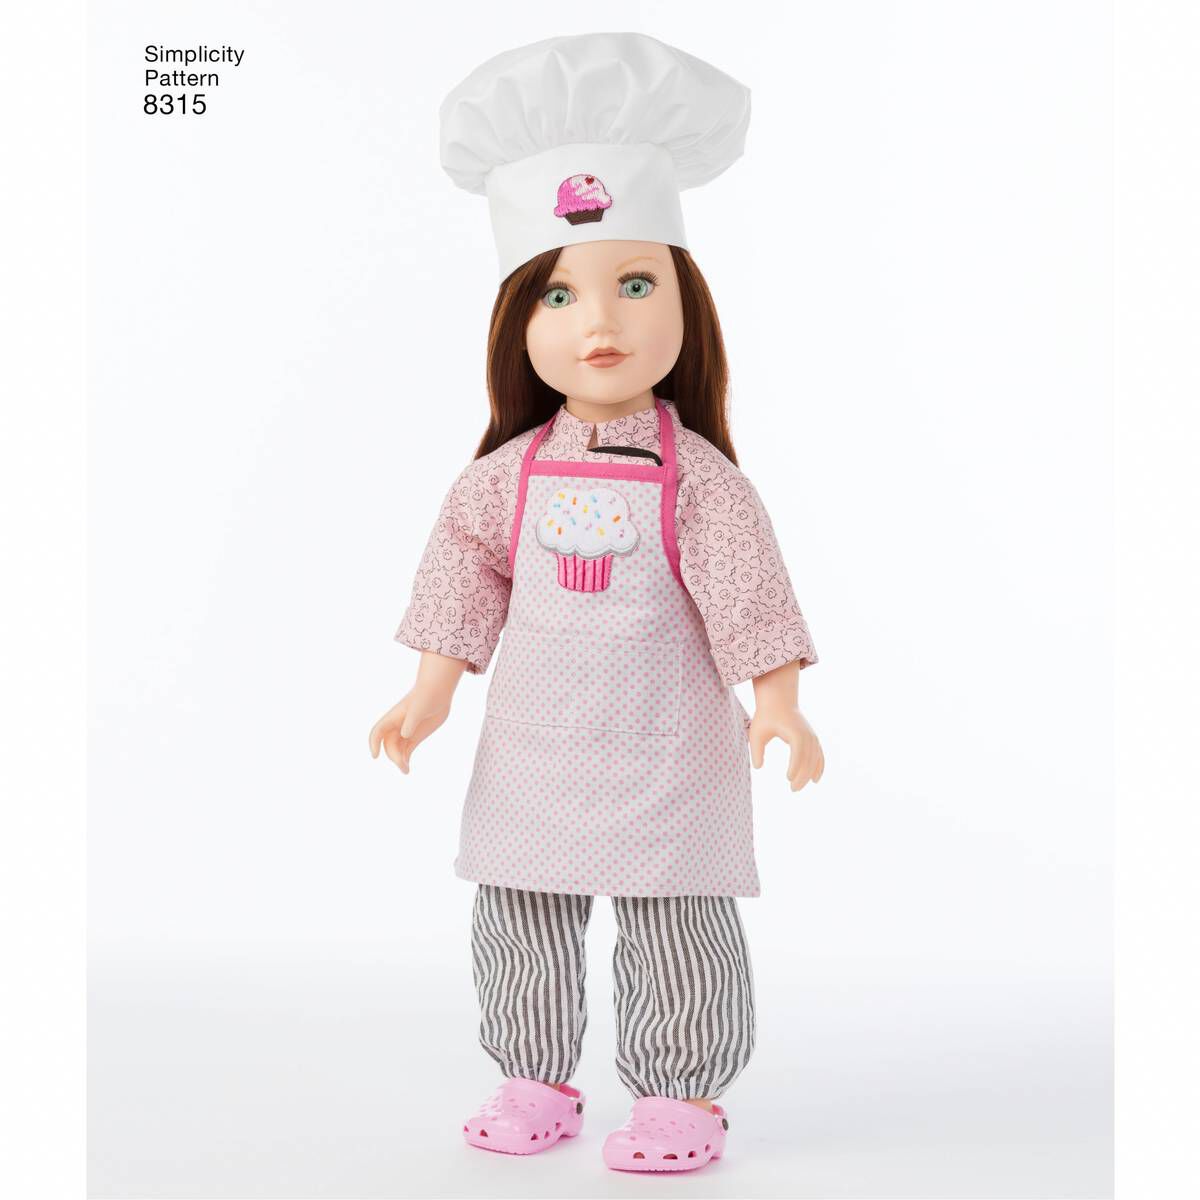 White SIMPLICITY Sewing Pattern S9001 18 Unisex Doll Clothes Paper various 